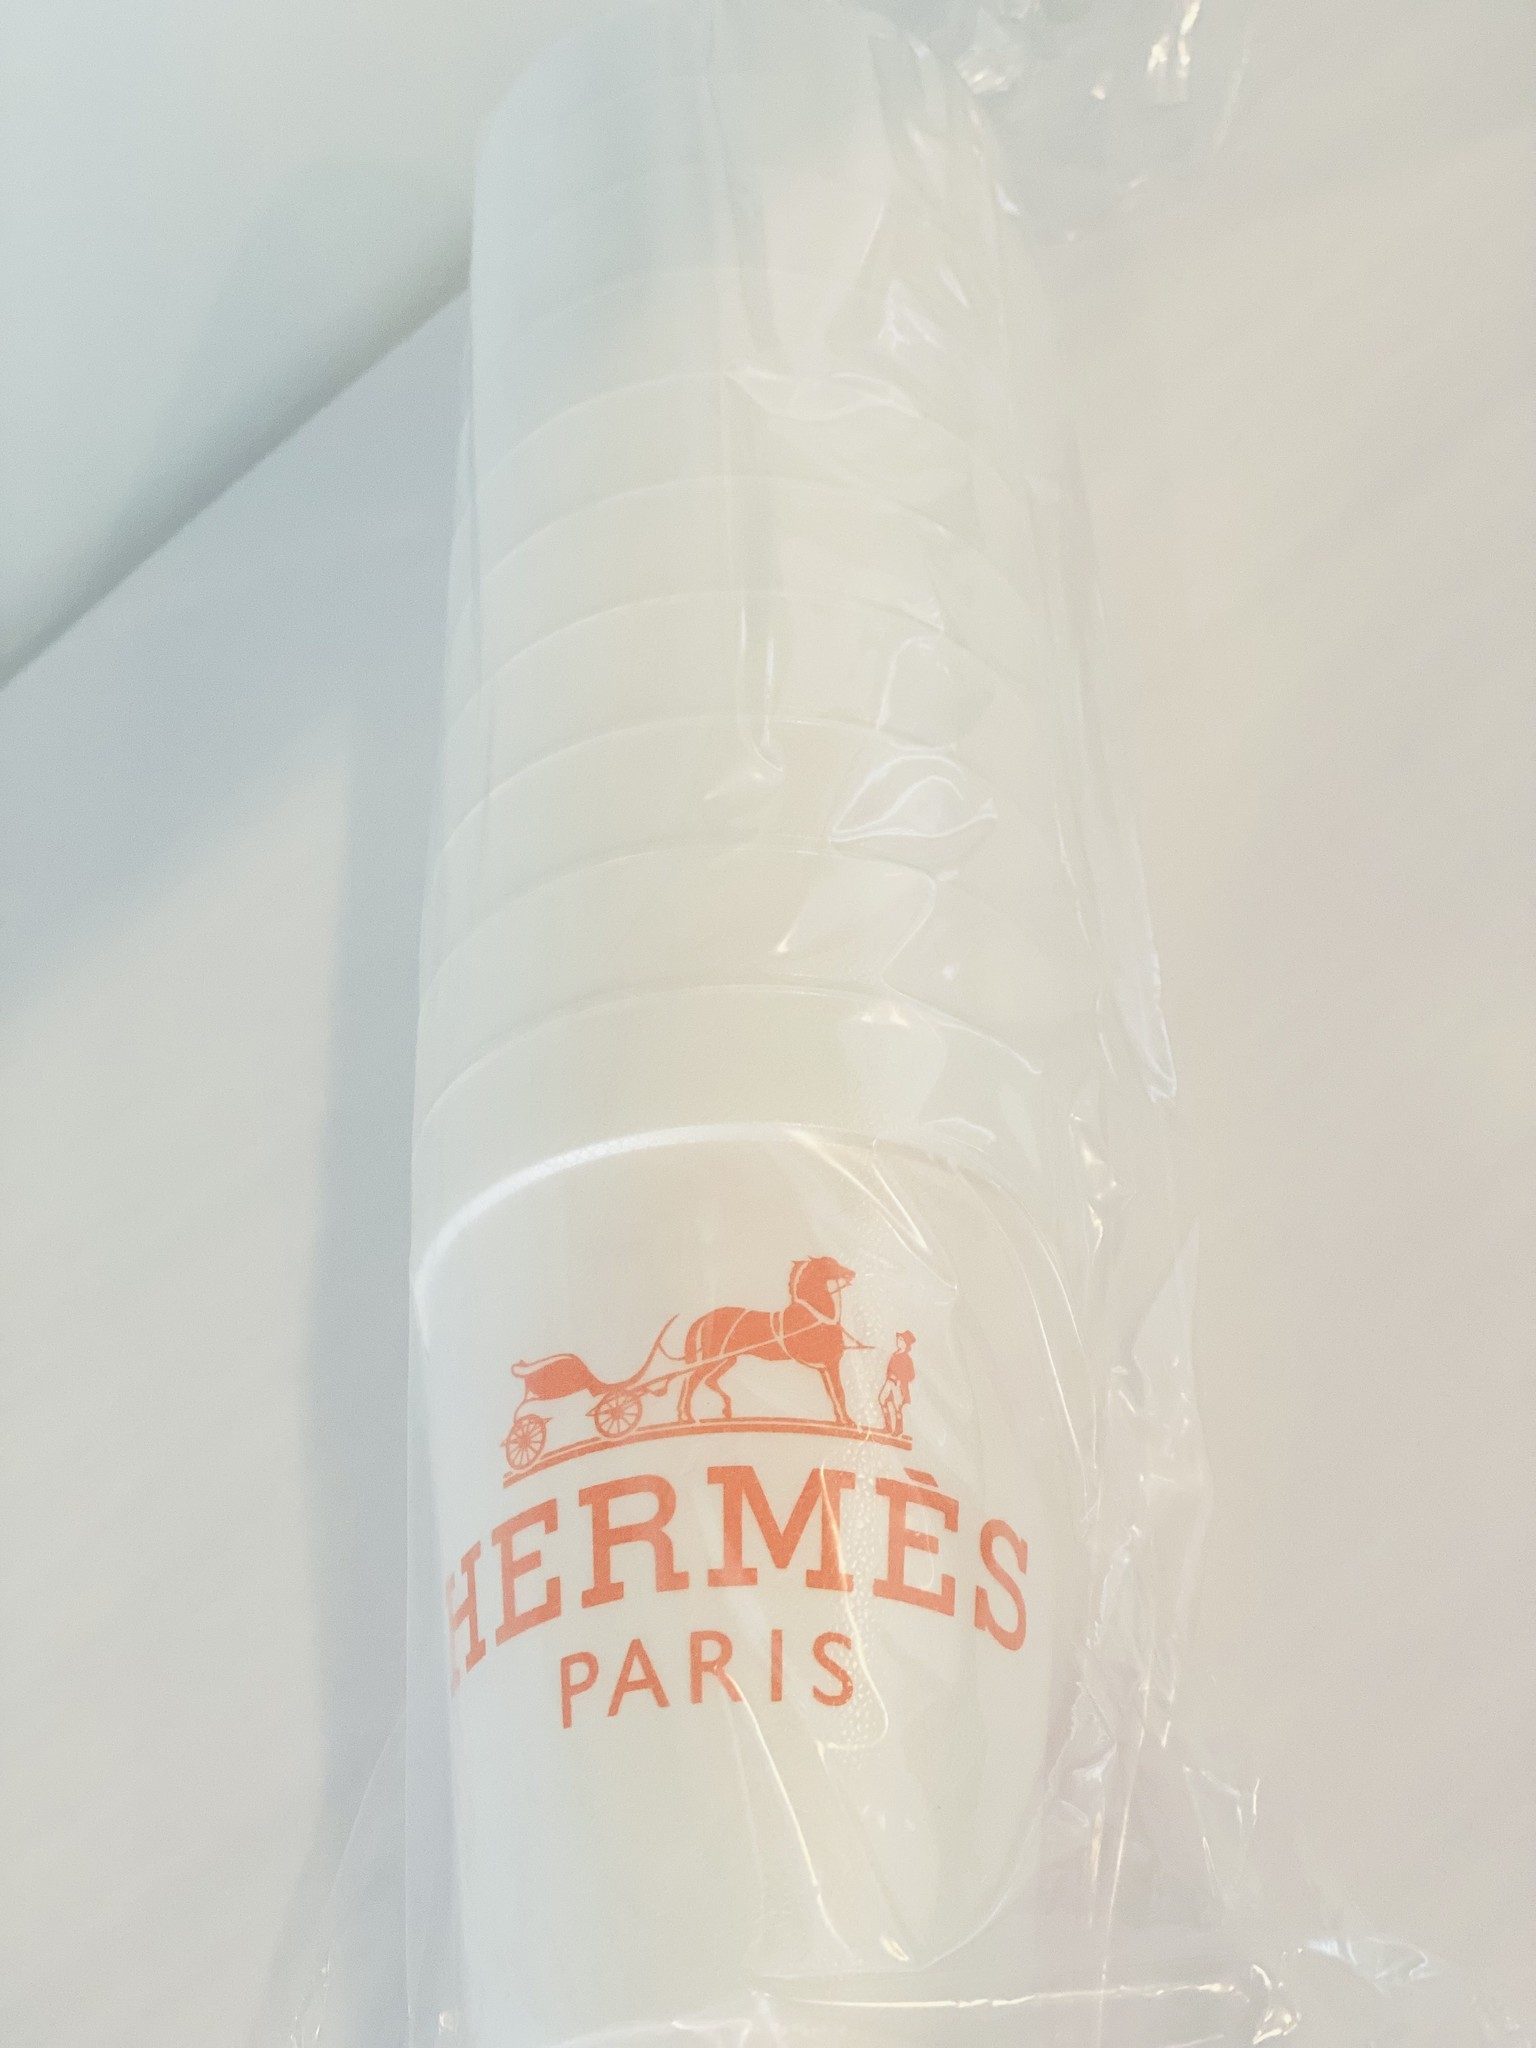 Hermes 16oz Styrofoam Cups - Rags and Riches Lifestyle Boutique